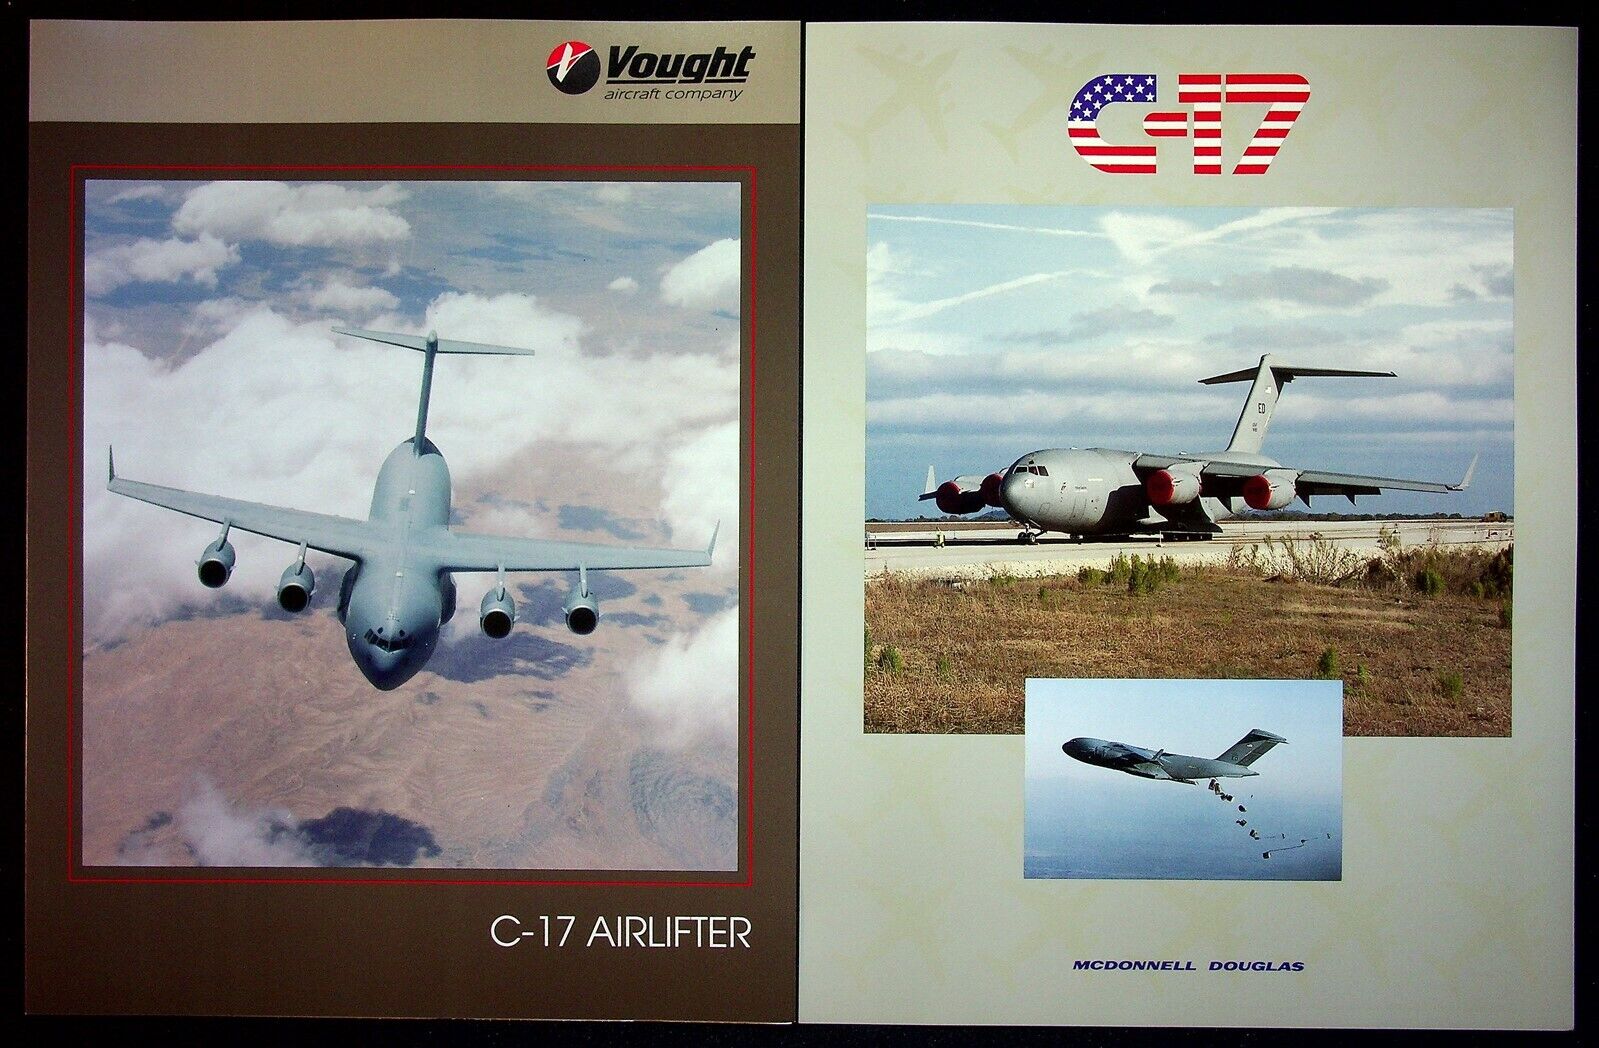 1990's Vought C-17 Globemaster III Airlifter Photo Specification Sheets 11x8 